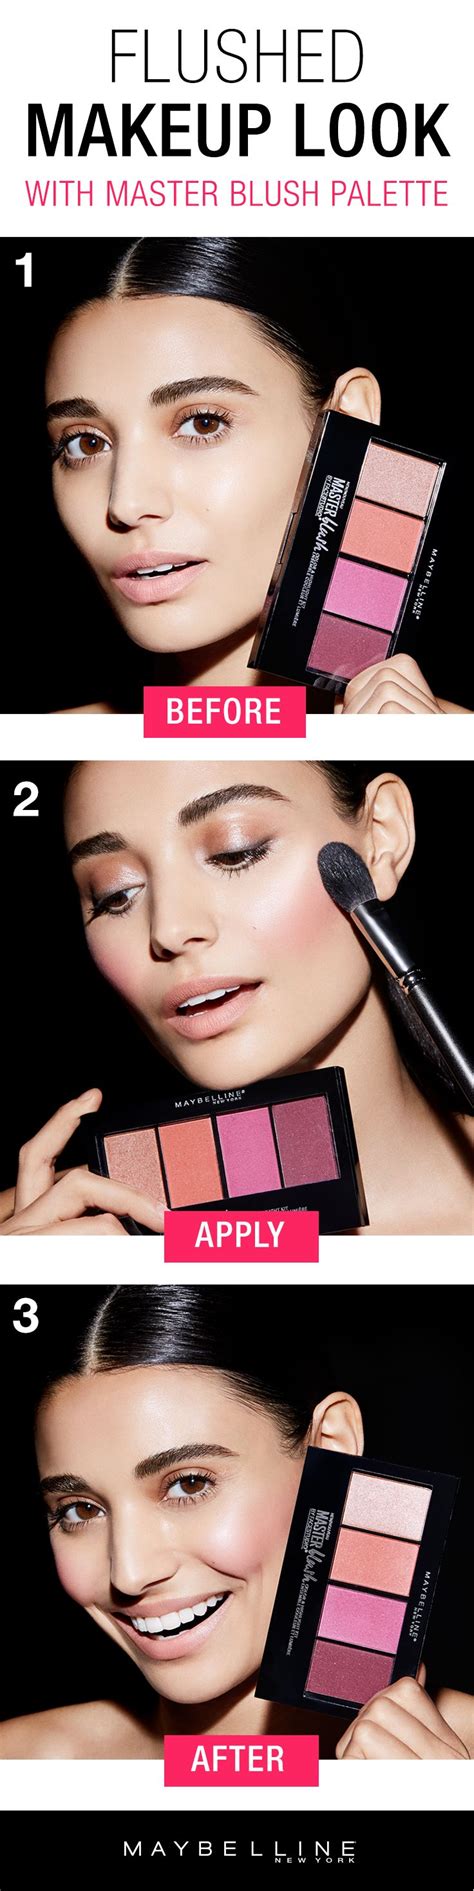 Nothing Says Spring More Than A Flushed Blushing Look Customize Your